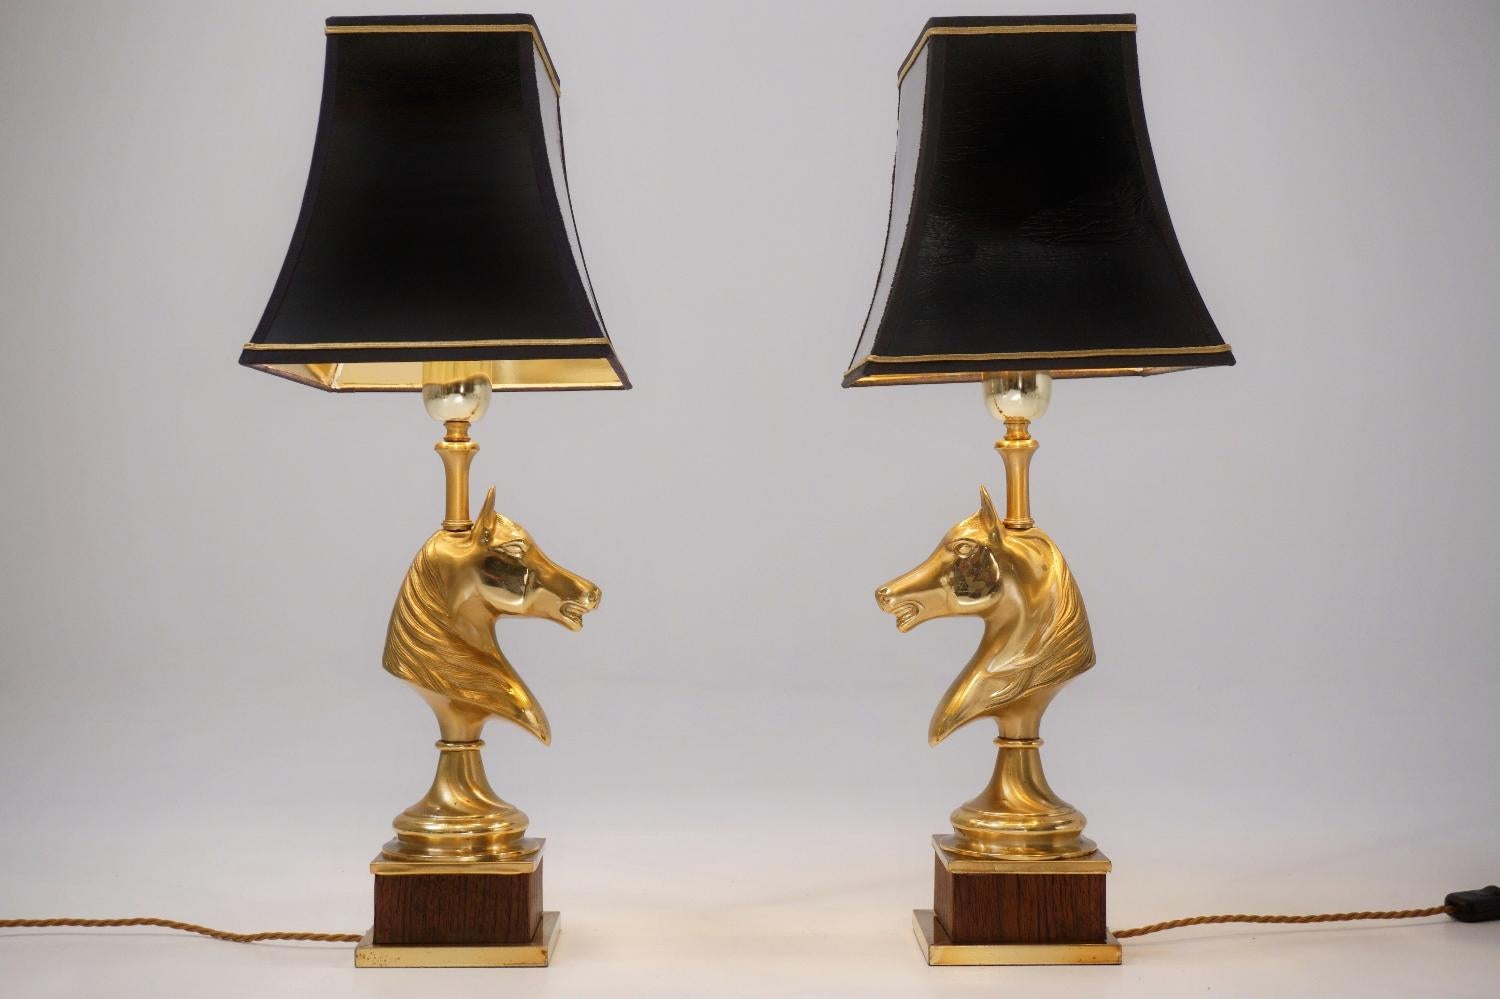 Maison Charles horse lamps, a pair in brass and wood, circa 1970s, French.

These table lamps have been gently cleaned while respecting the vintage patina. Both are newly rewired, earthed, fully working and PAT tested by an electrician. Each has a